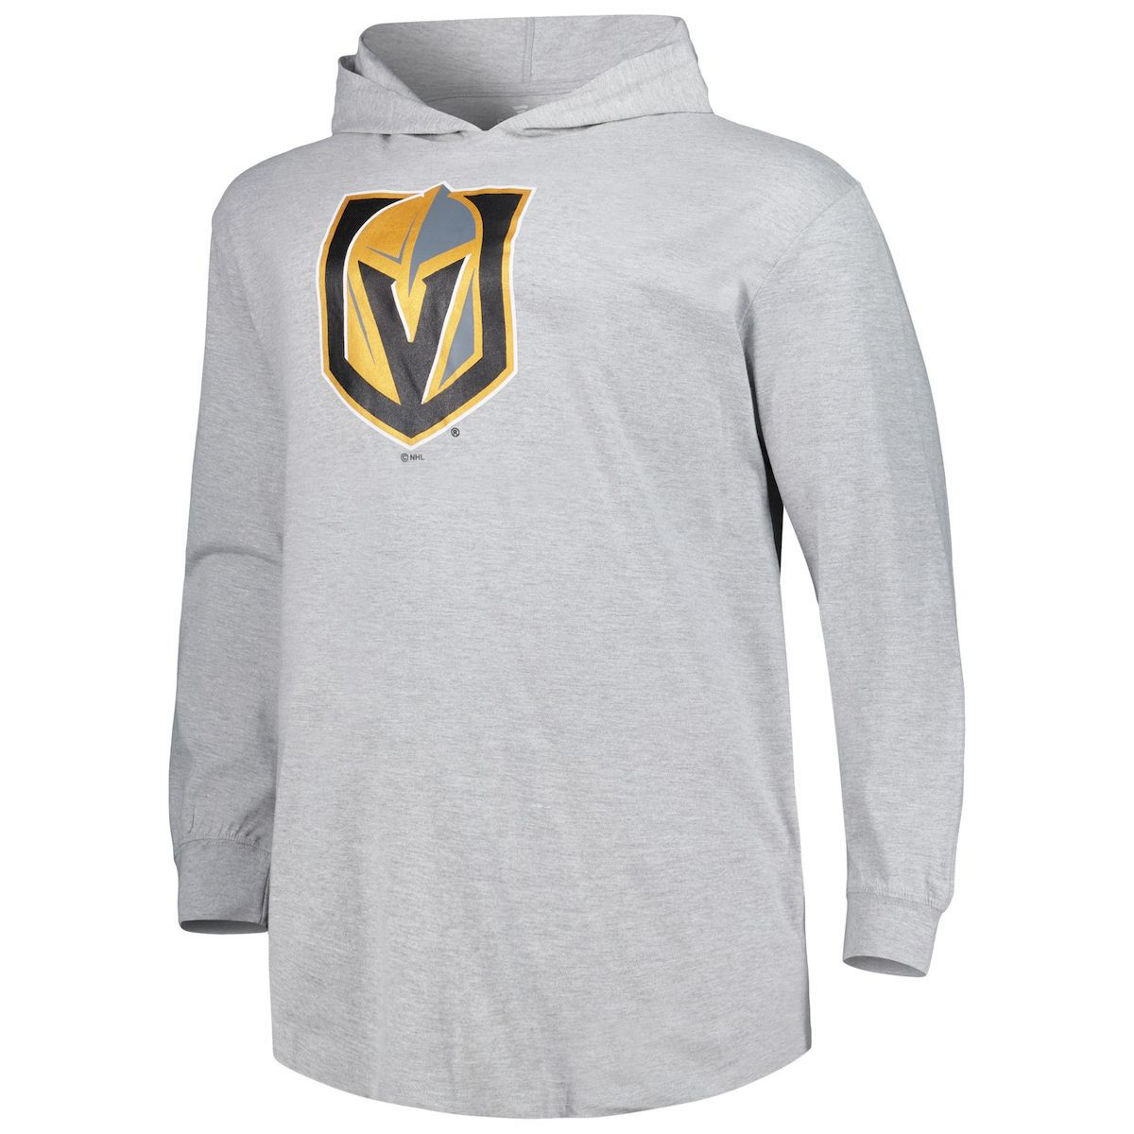 Profile Men's Heather Gray Vegas Golden Knights Big & Tall Pullover Hoodie - Image 3 of 4